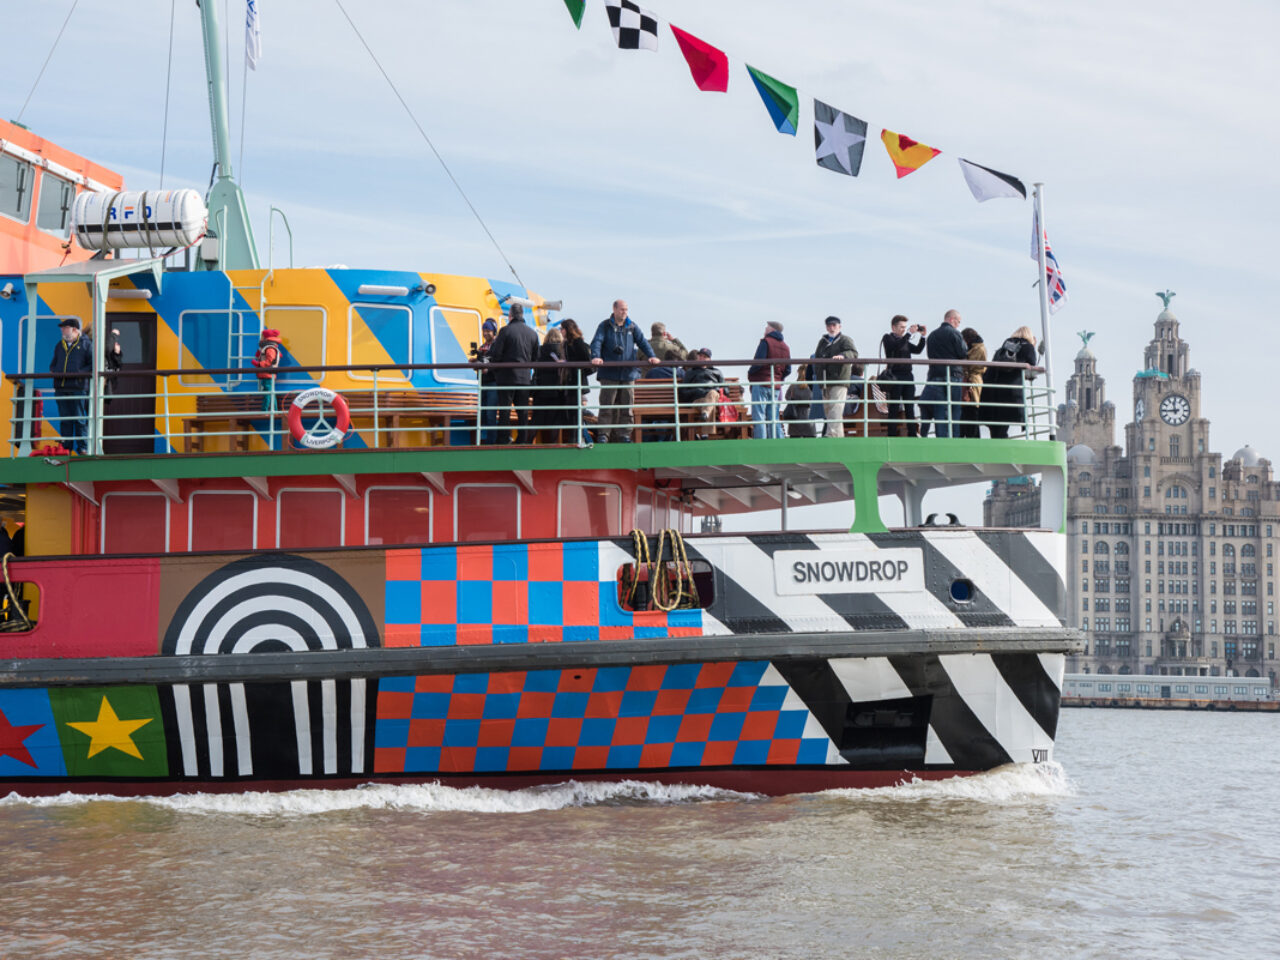 A colouful patterned ferry sailing across the River Mersey. There are people on the balcony looking out and you can see the Royal Liver Building in the distance